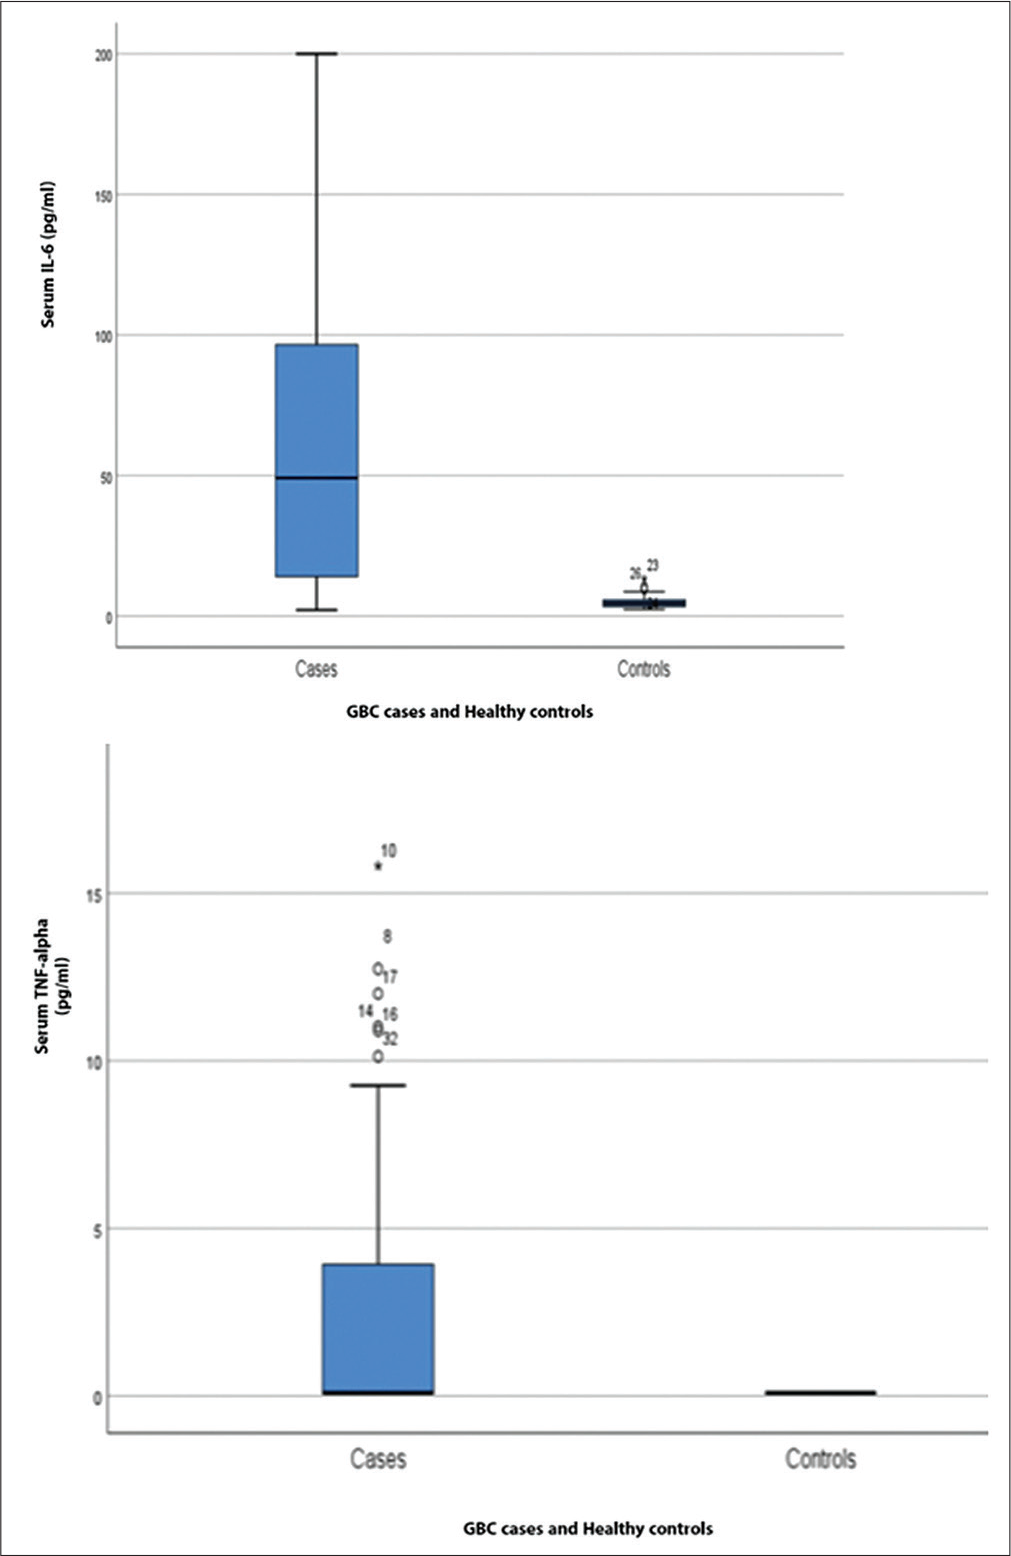 Serum levels of interleukin-6 and tumor necrosis factor-alpha in diagnosis and prognosis of gallbladder cancer: a pilot study